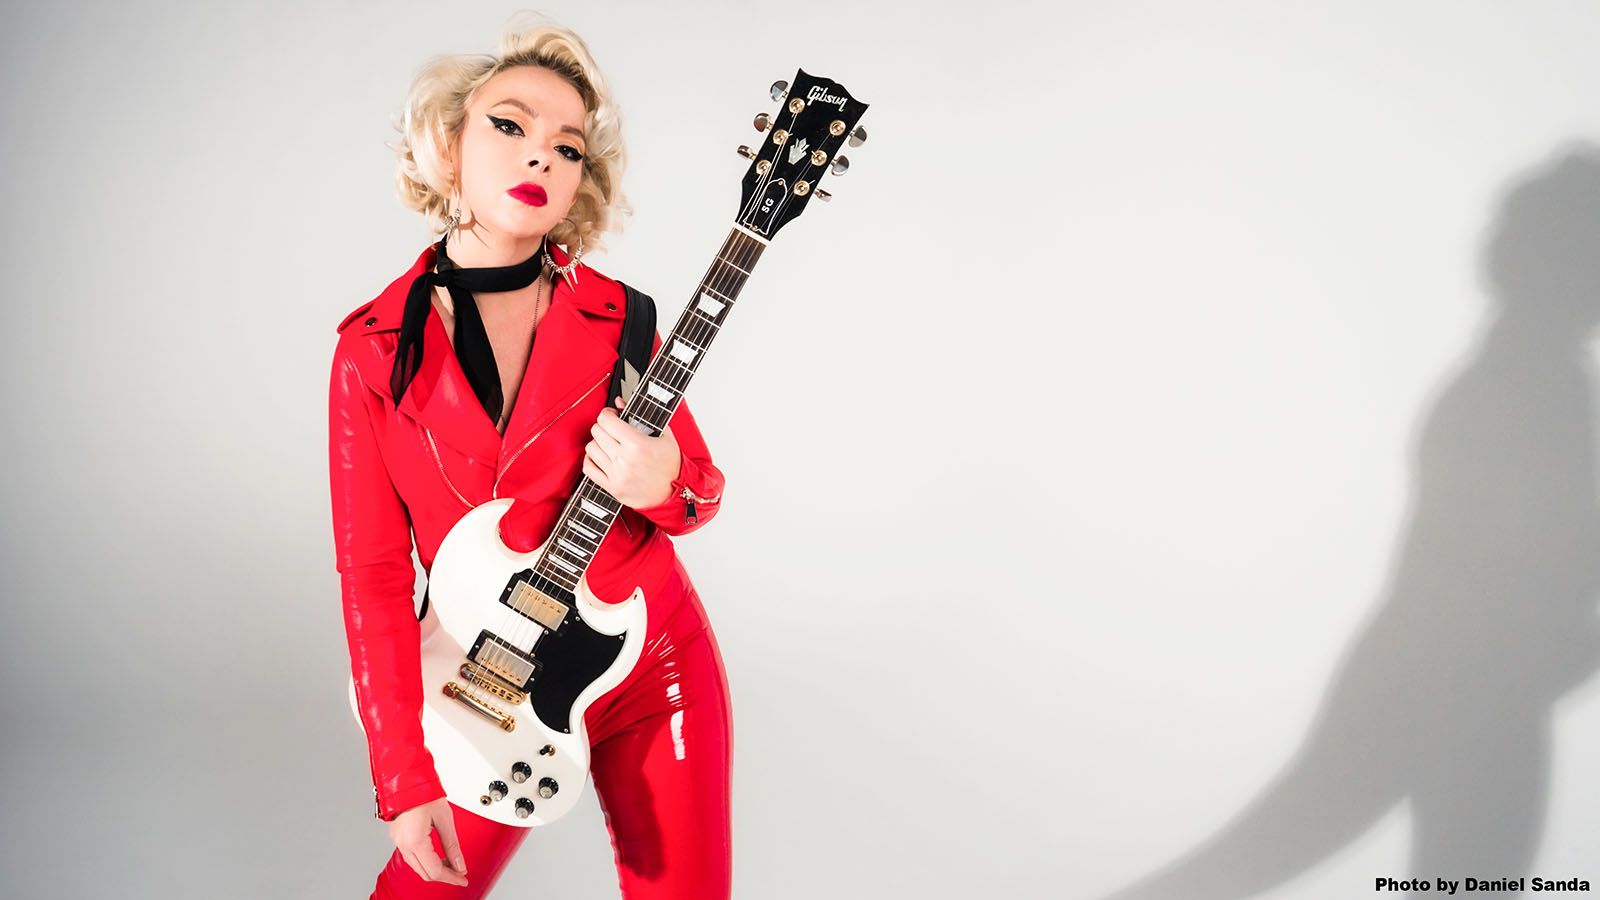 Blues musician Samantha Fish will be at The Clyde Theatre on Aug. 18 with Sgt. Splendor.